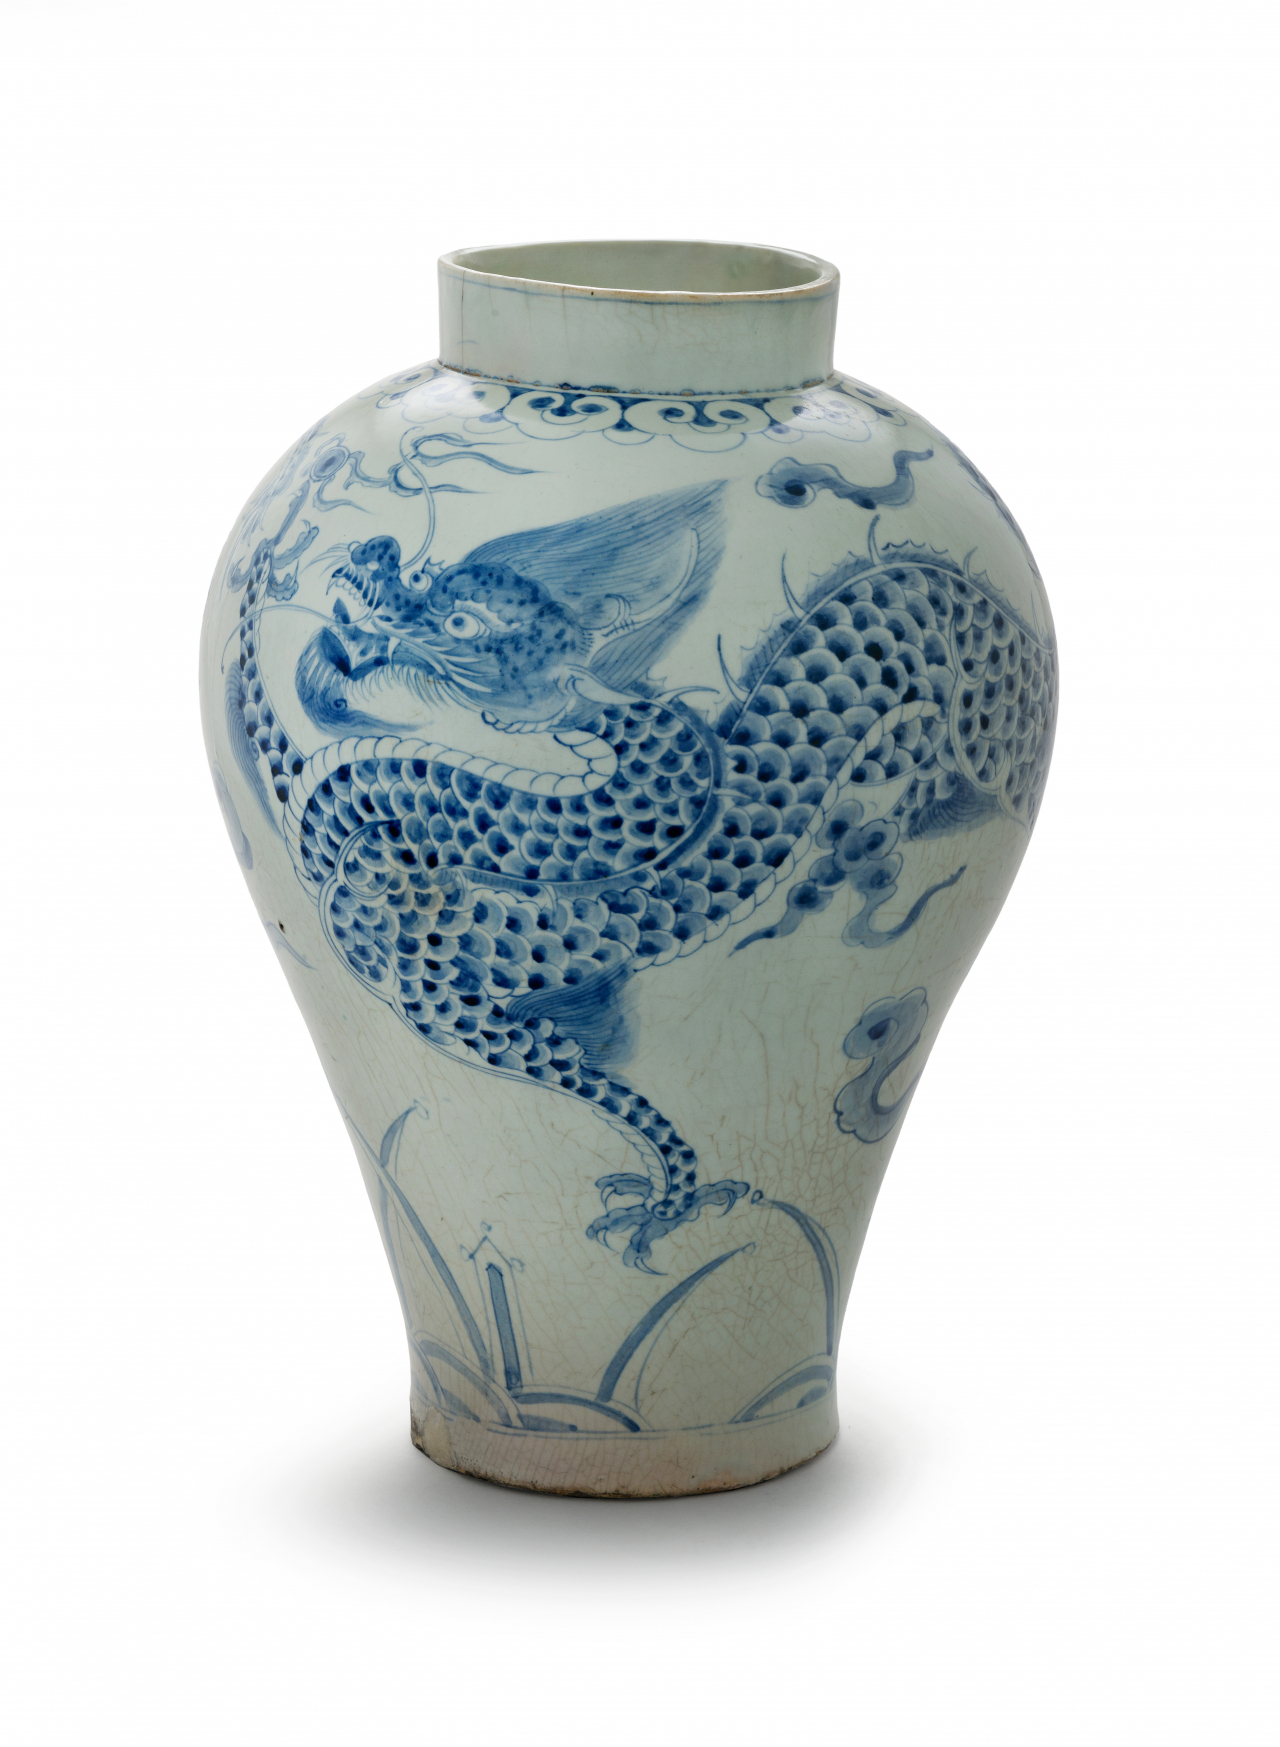 Blue and White Porcelain Jar with Cloud and Dragon Pattern. (National Folk Museum of Korea)